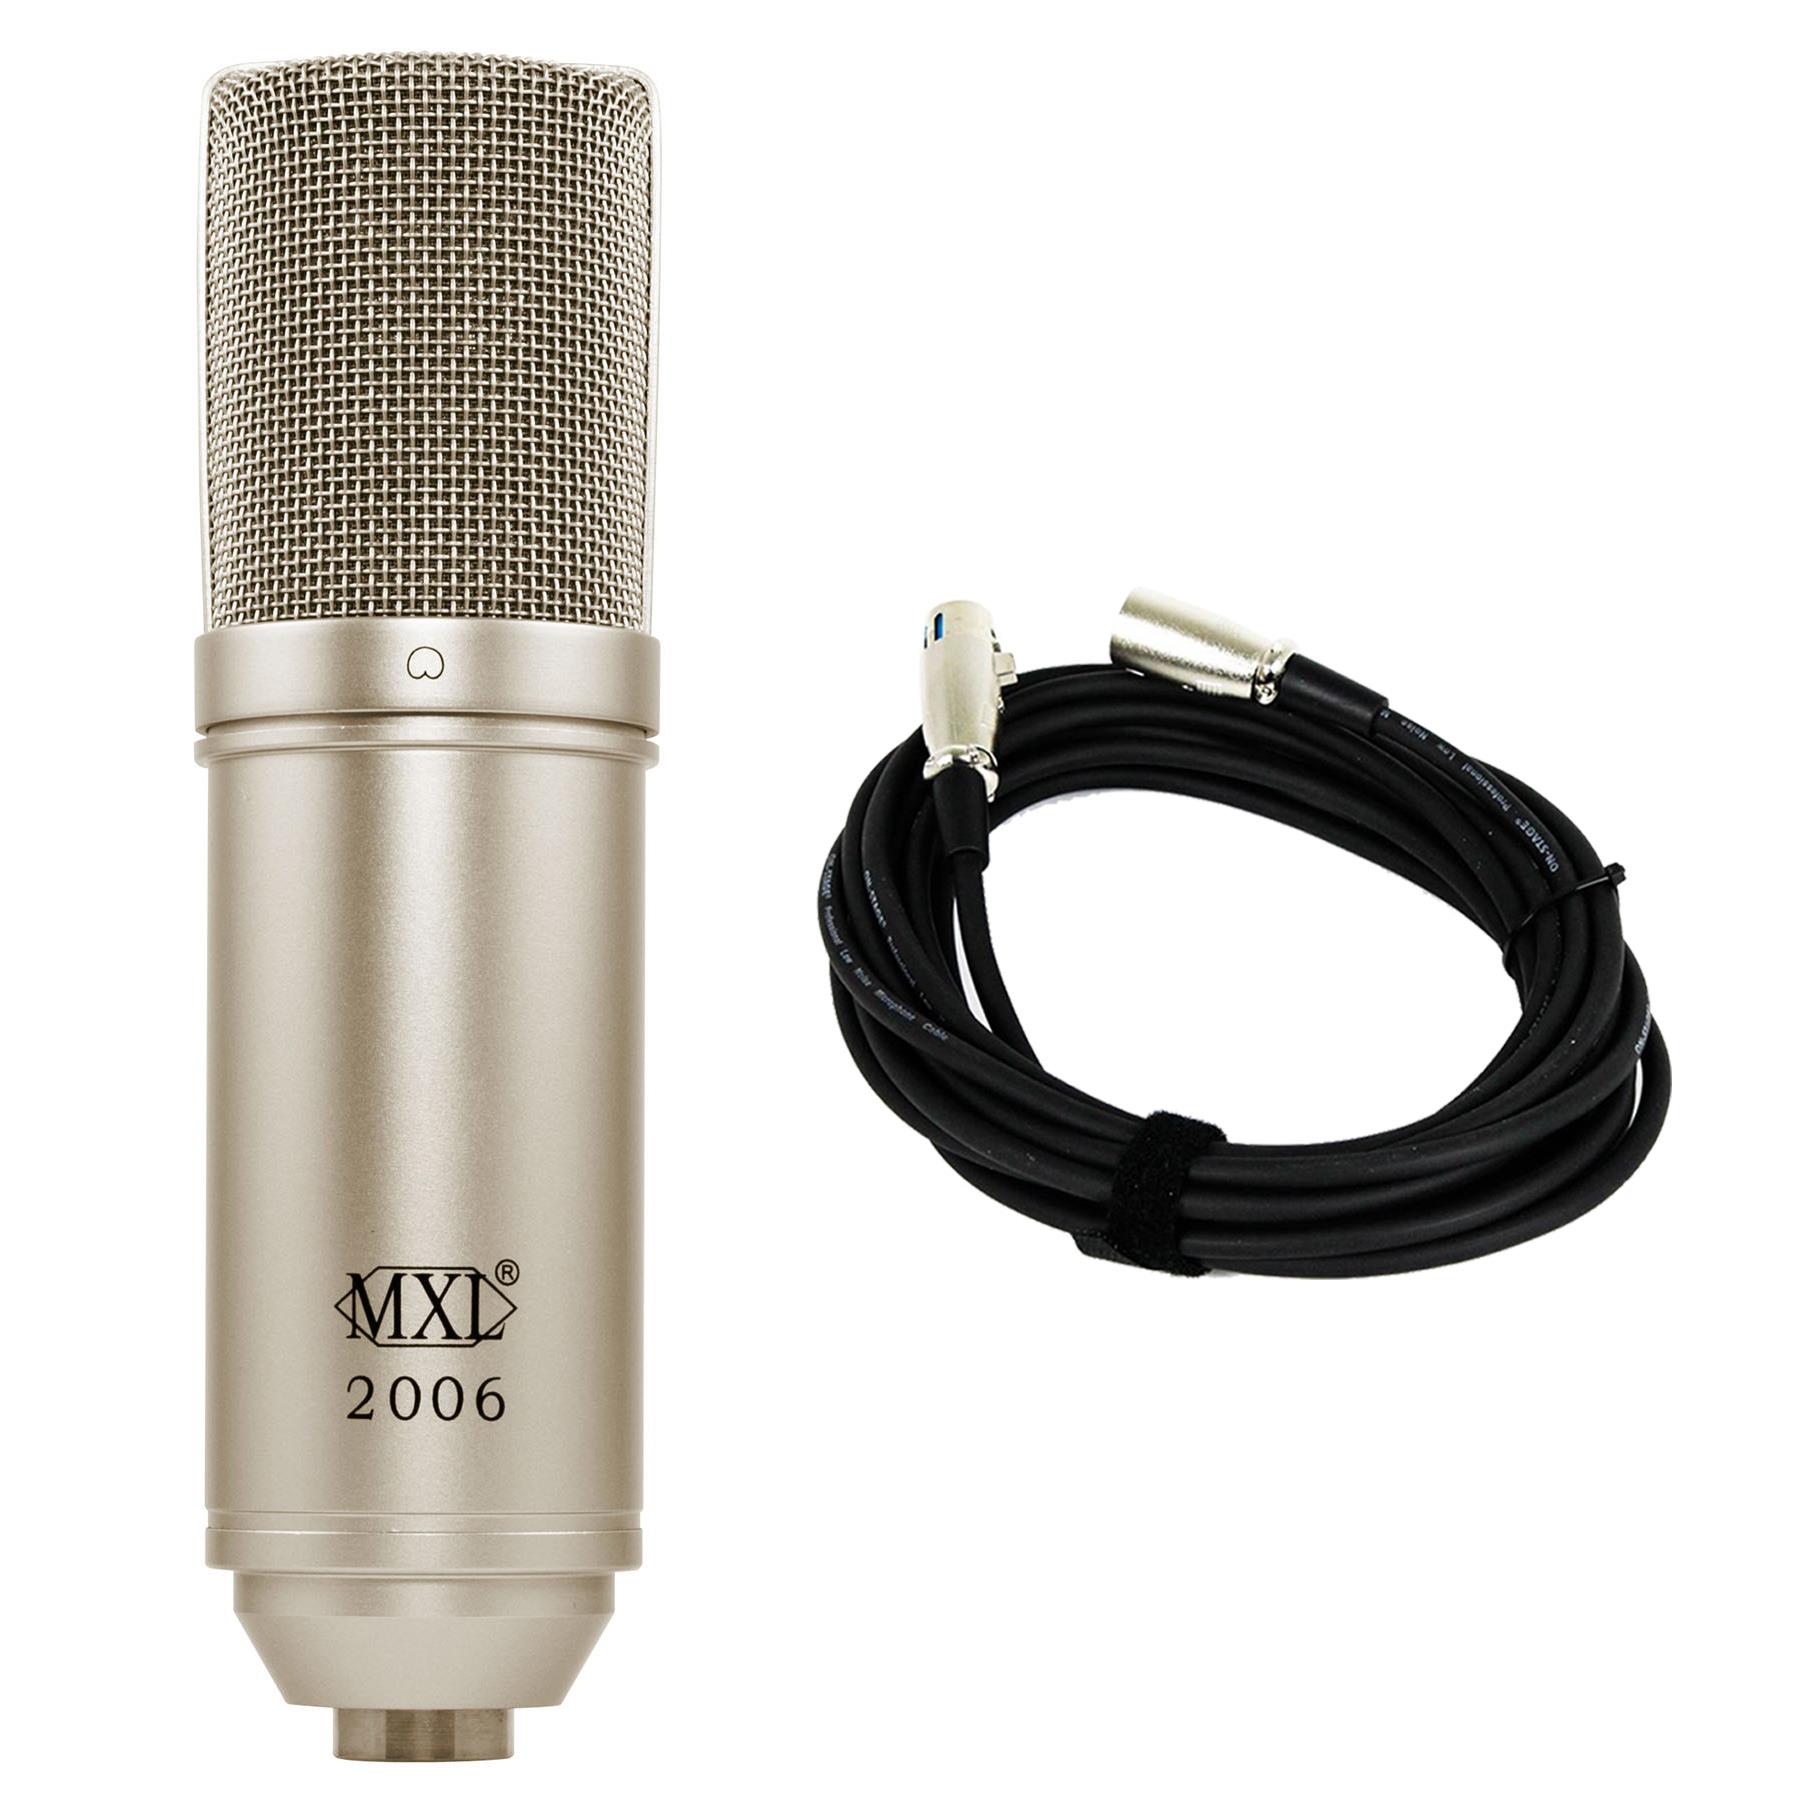 MXL 2006 Microphone w/ 20-foot XLR Cable Bundle - image 1 of 7